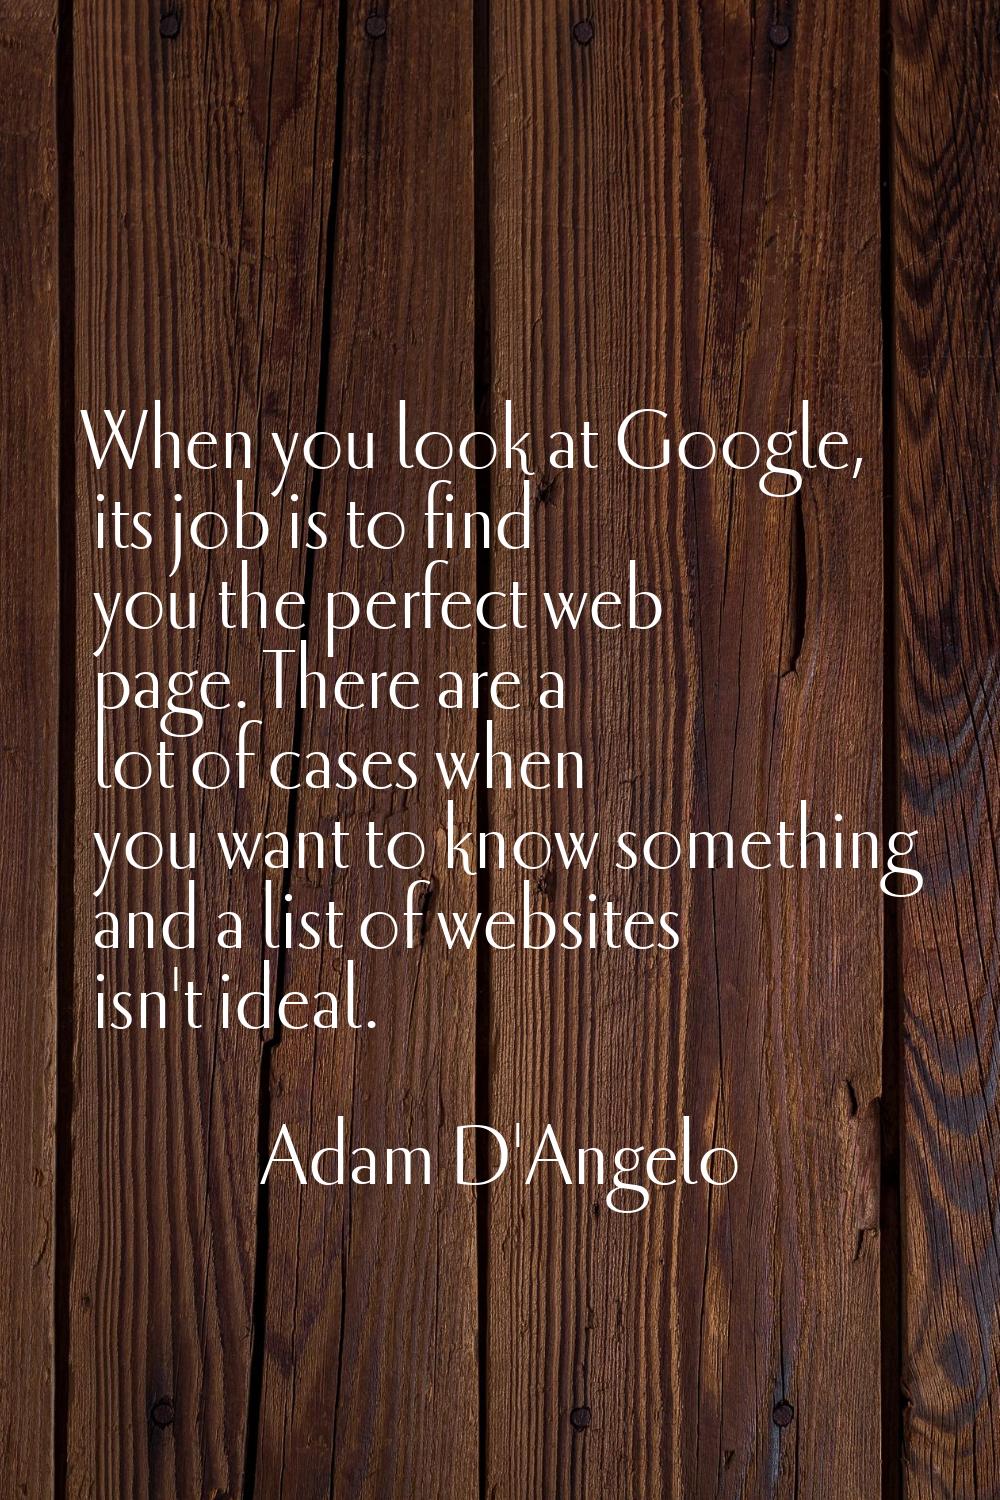 When you look at Google, its job is to find you the perfect web page. There are a lot of cases when